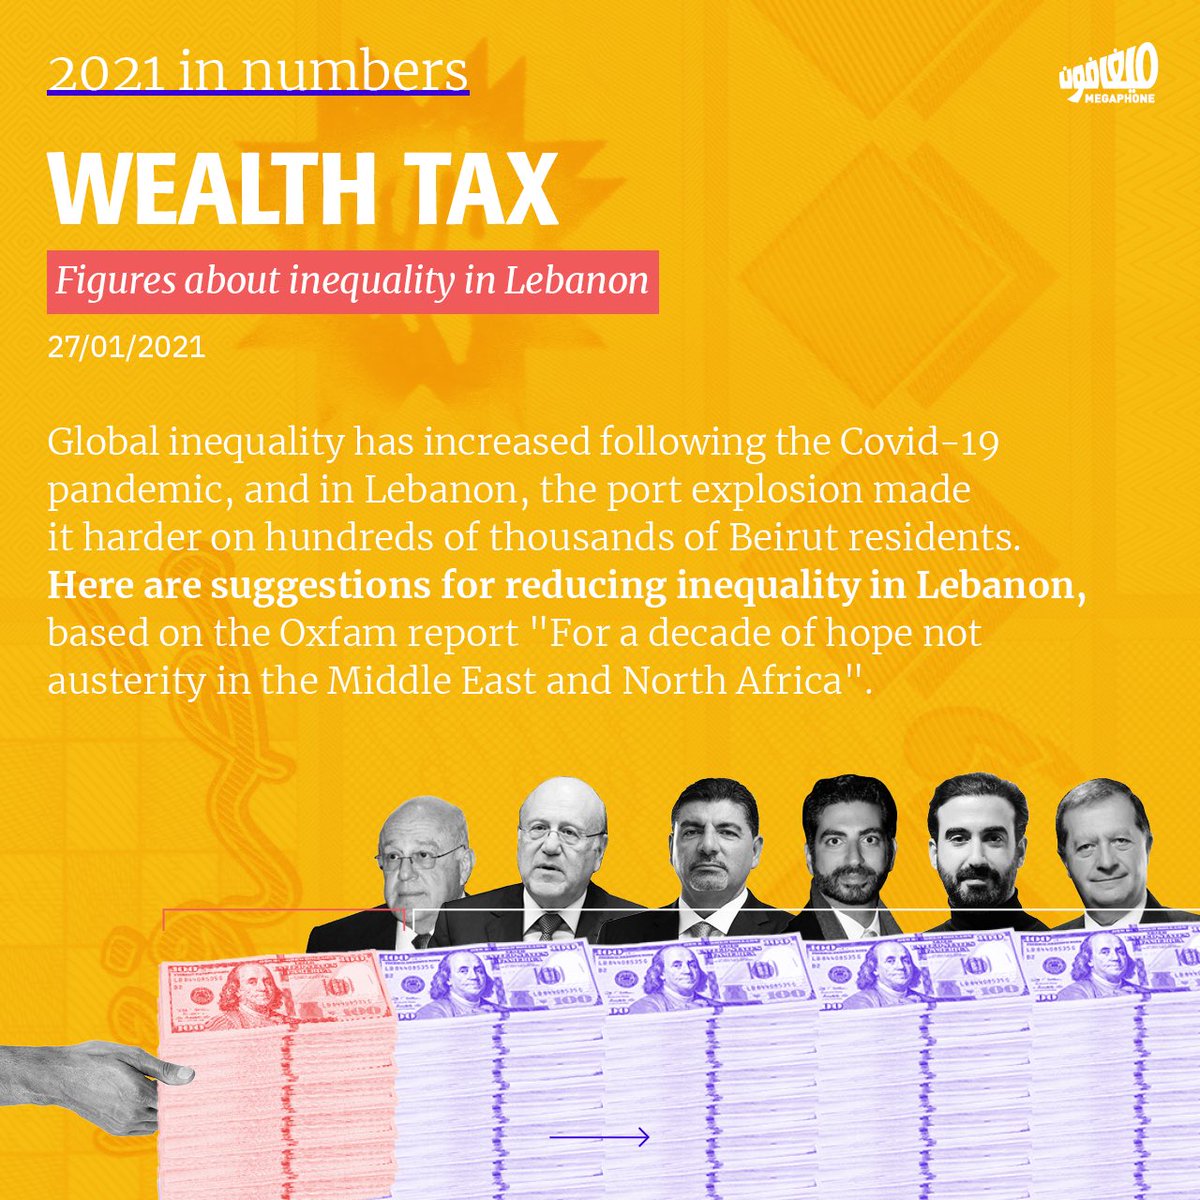 There are 1780 millionaires in Lebanon. What if their wealth could be taxed?These infographics were produced with the support of Oxfam.  #FightingInequality  #PeoplesVaccine  #Oxfam  #Lebanon1/3